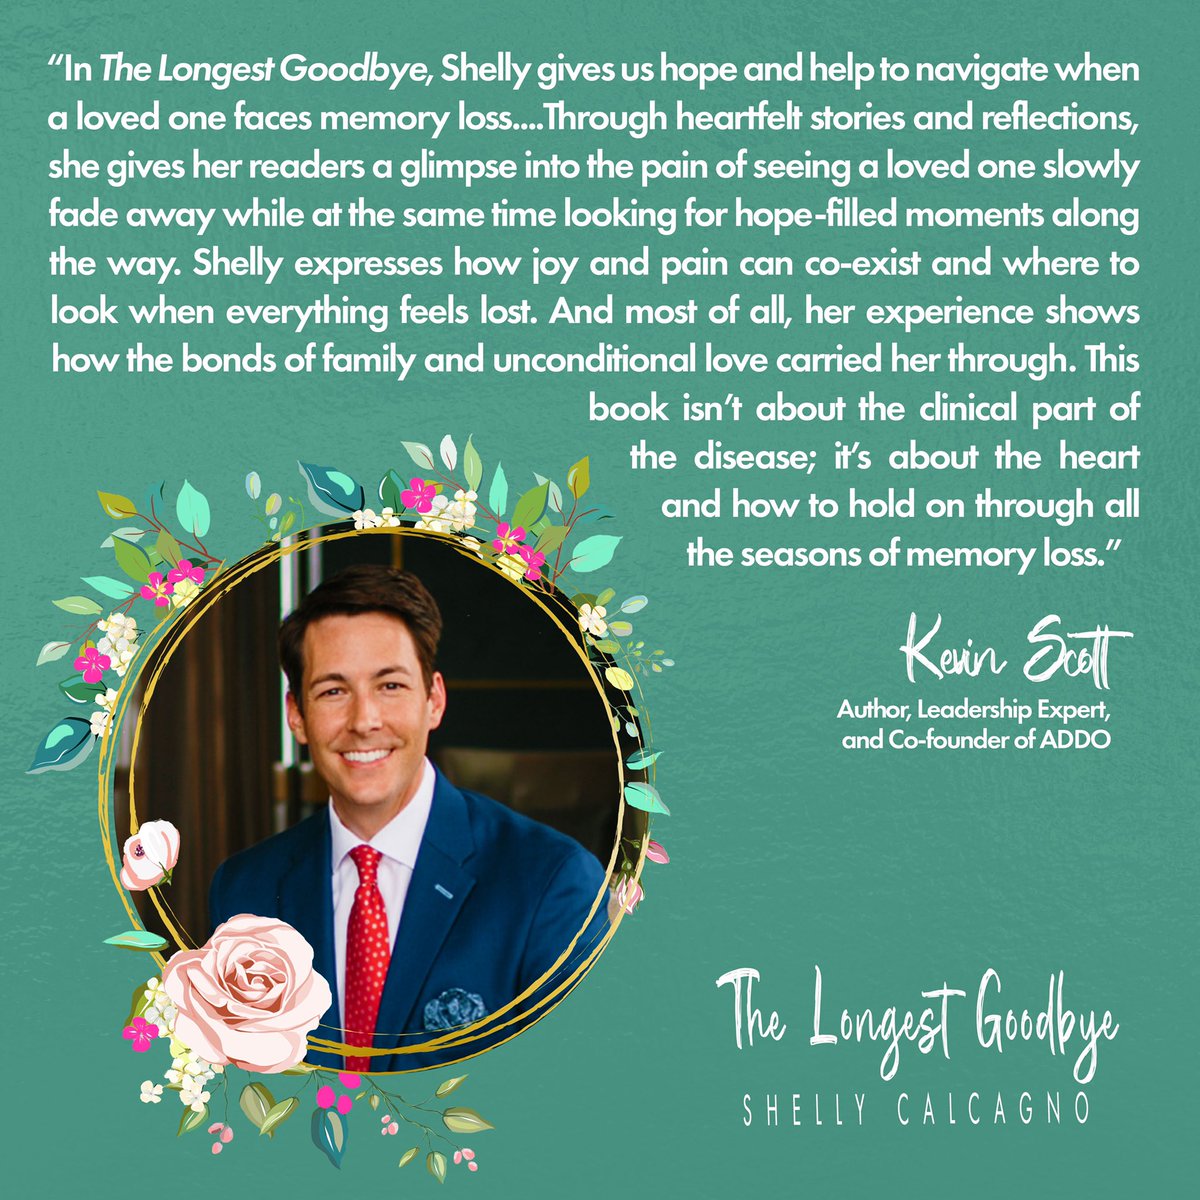 Thank you @KevinPaulScott for your endorsement of The Longest Goodbye. I so appreciate your support! 

Release date coming up in just ONE WEEK  on November 15th! 

Pre-order at tinyurl.com/45tp9r4z
💗

#AlzheimersAwarenessMonth #CaregivingHappens @alzassociation @AlzAuthors